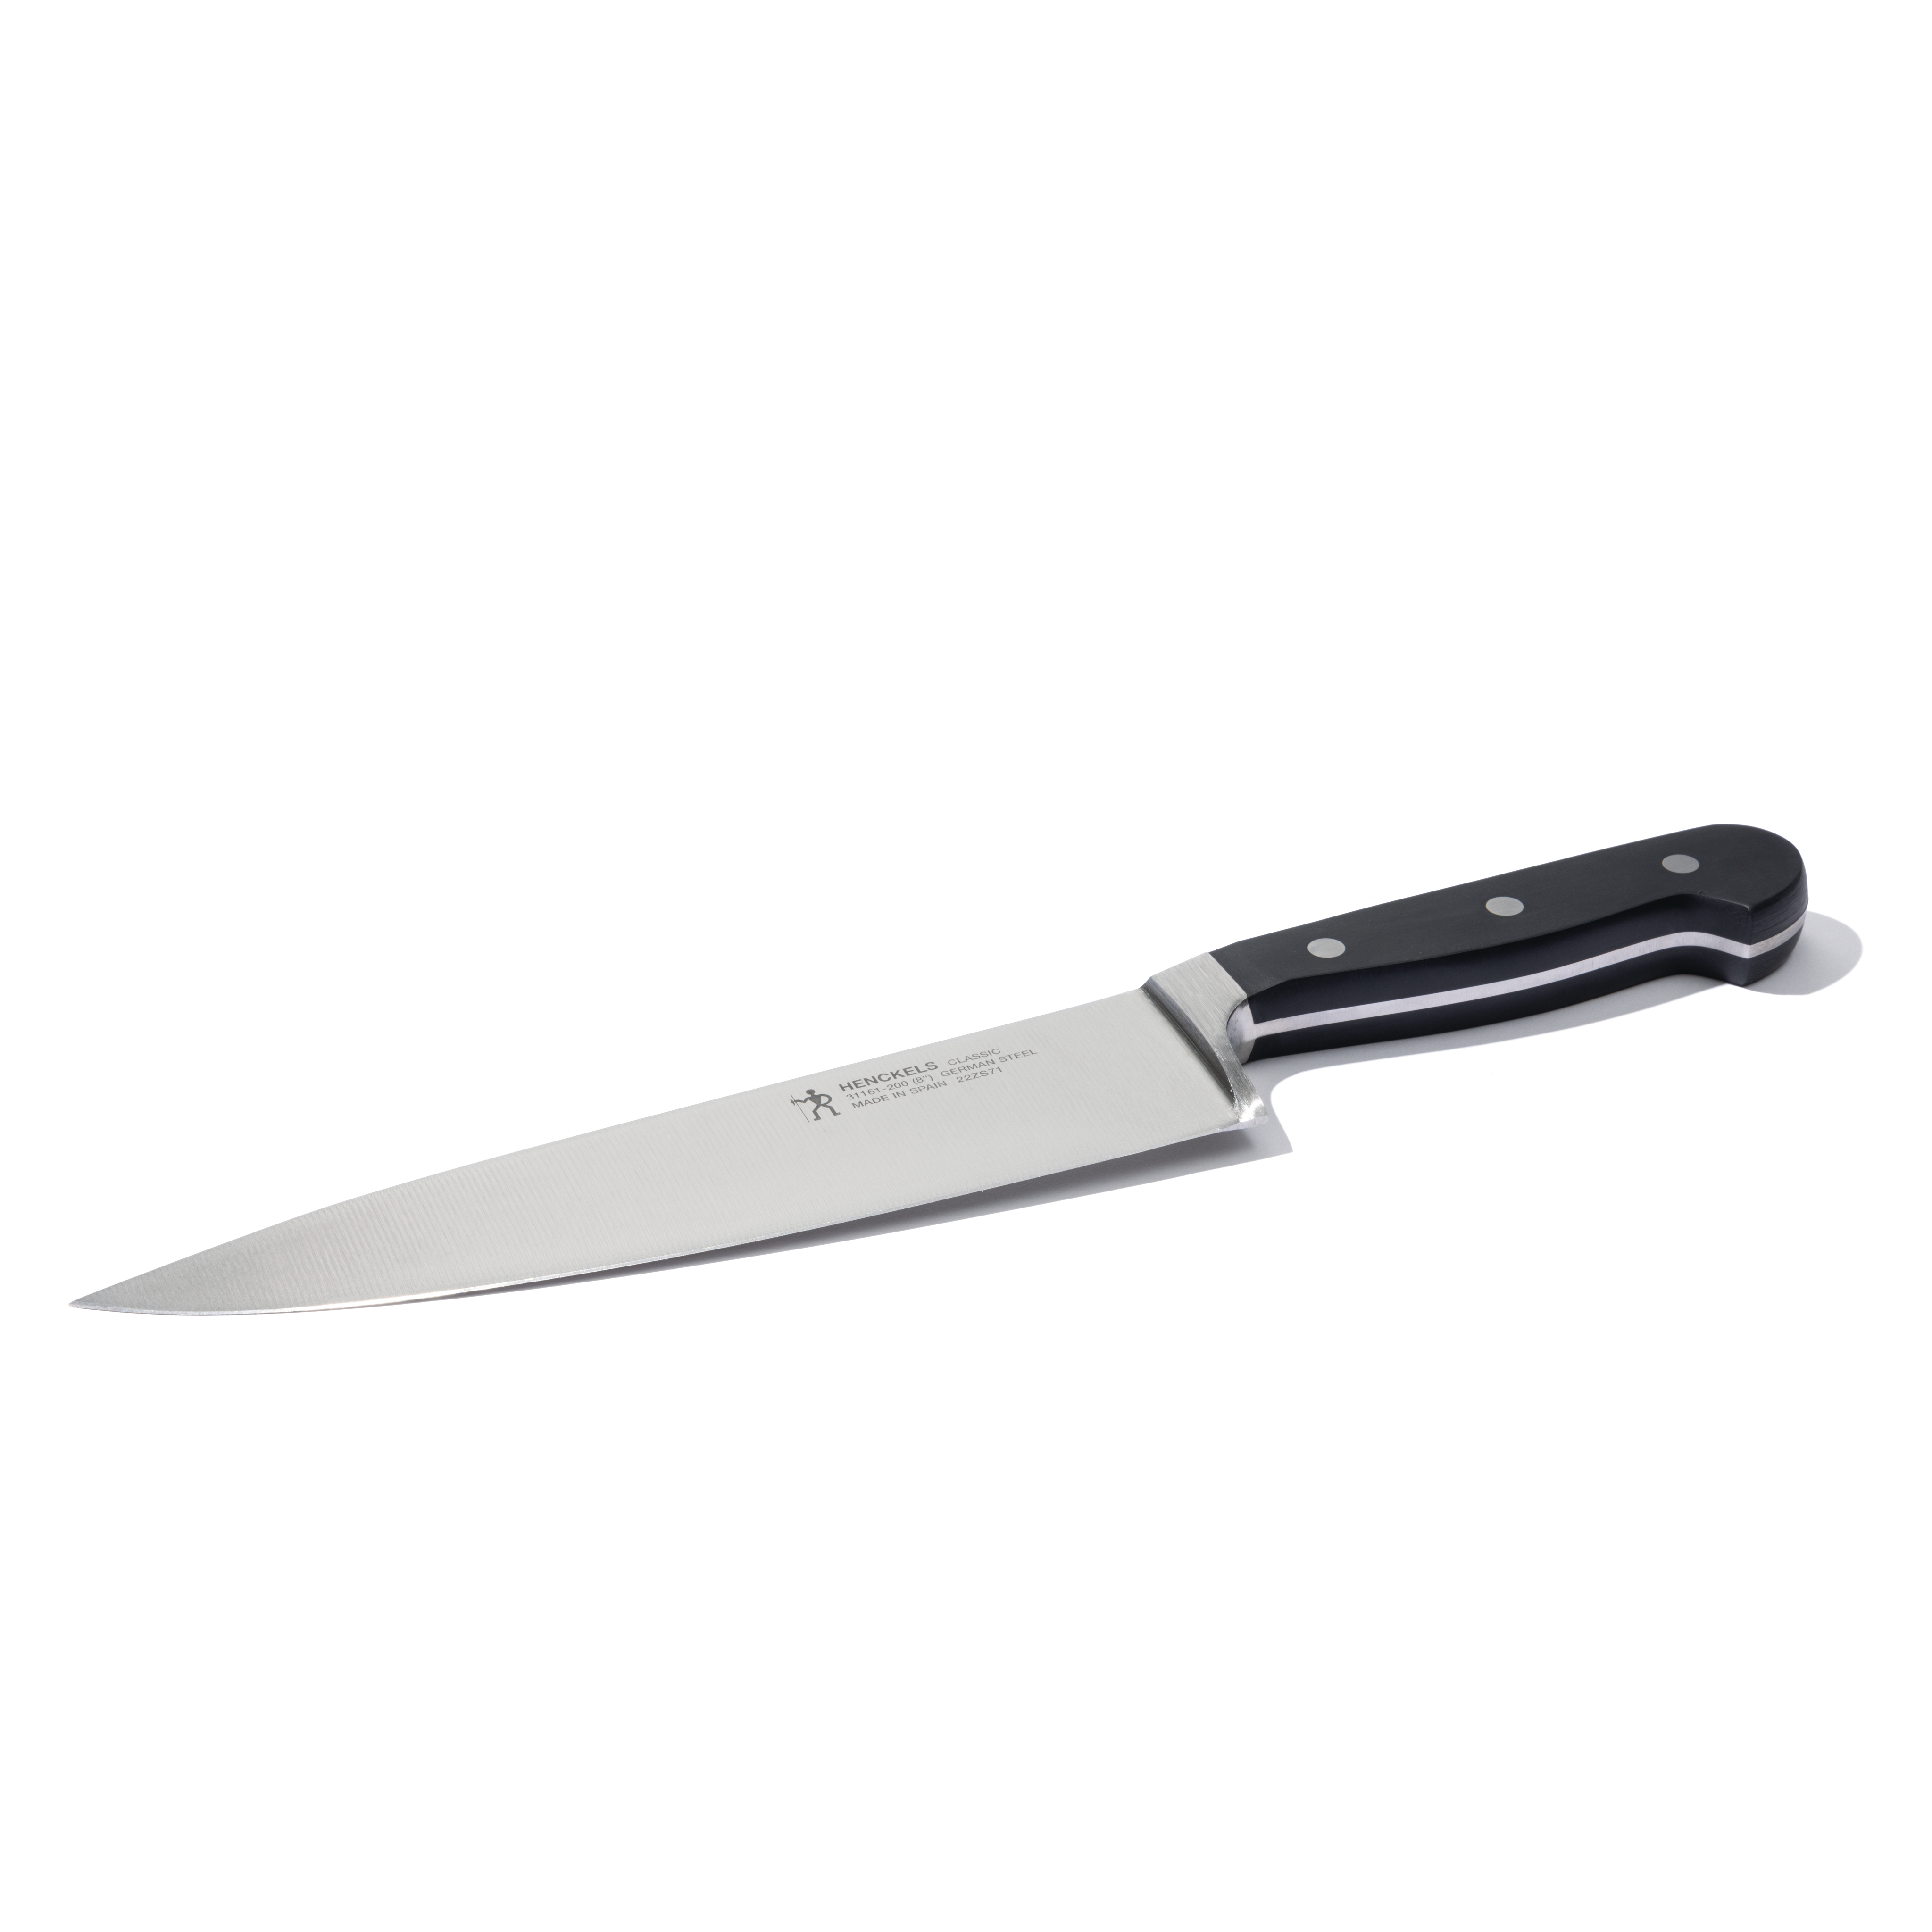 https://res.cloudinary.com/hksqkdlah/image/upload/SIL_Knives_Henckels_Classic-8-inch-Chefs-Knife_31161-201_vz9kcc.png